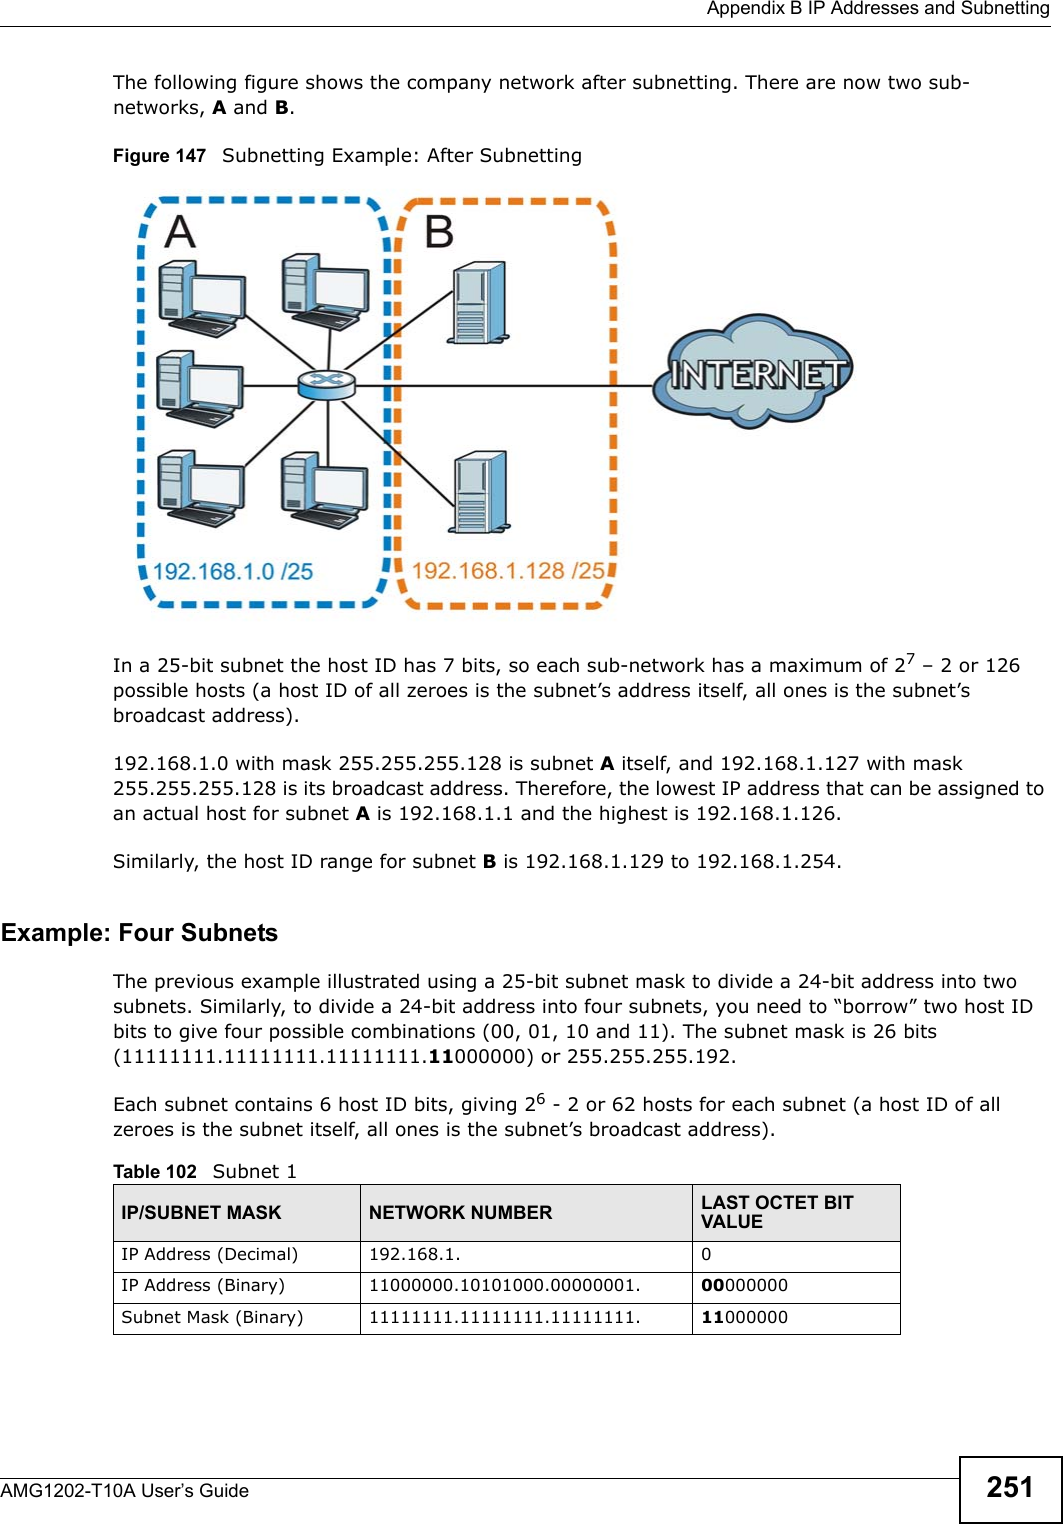  Appendix B IP Addresses and SubnettingAMG1202-T10A User’s Guide 251The following figure shows the company network after subnetting. There are now two sub-networks, A and B. Figure 147   Subnetting Example: After SubnettingIn a 25-bit subnet the host ID has 7 bits, so each sub-network has a maximum of 27 – 2 or 126 possible hosts (a host ID of all zeroes is the subnet’s address itself, all ones is the subnet’s broadcast address).192.168.1.0 with mask 255.255.255.128 is subnet A itself, and 192.168.1.127 with mask 255.255.255.128 is its broadcast address. Therefore, the lowest IP address that can be assigned to an actual host for subnet A is 192.168.1.1 and the highest is 192.168.1.126. Similarly, the host ID range for subnet B is 192.168.1.129 to 192.168.1.254.Example: Four Subnets The previous example illustrated using a 25-bit subnet mask to divide a 24-bit address into two subnets. Similarly, to divide a 24-bit address into four subnets, you need to “borrow” two host ID bits to give four possible combinations (00, 01, 10 and 11). The subnet mask is 26 bits (11111111.11111111.11111111.11000000) or 255.255.255.192. Each subnet contains 6 host ID bits, giving 26 - 2 or 62 hosts for each subnet (a host ID of all zeroes is the subnet itself, all ones is the subnet’s broadcast address). Table 102   Subnet 1IP/SUBNET MASK NETWORK NUMBER LAST OCTET BIT VALUEIP Address (Decimal) 192.168.1. 0IP Address (Binary) 11000000.10101000.00000001. 00000000Subnet Mask (Binary) 11111111.11111111.11111111. 11000000